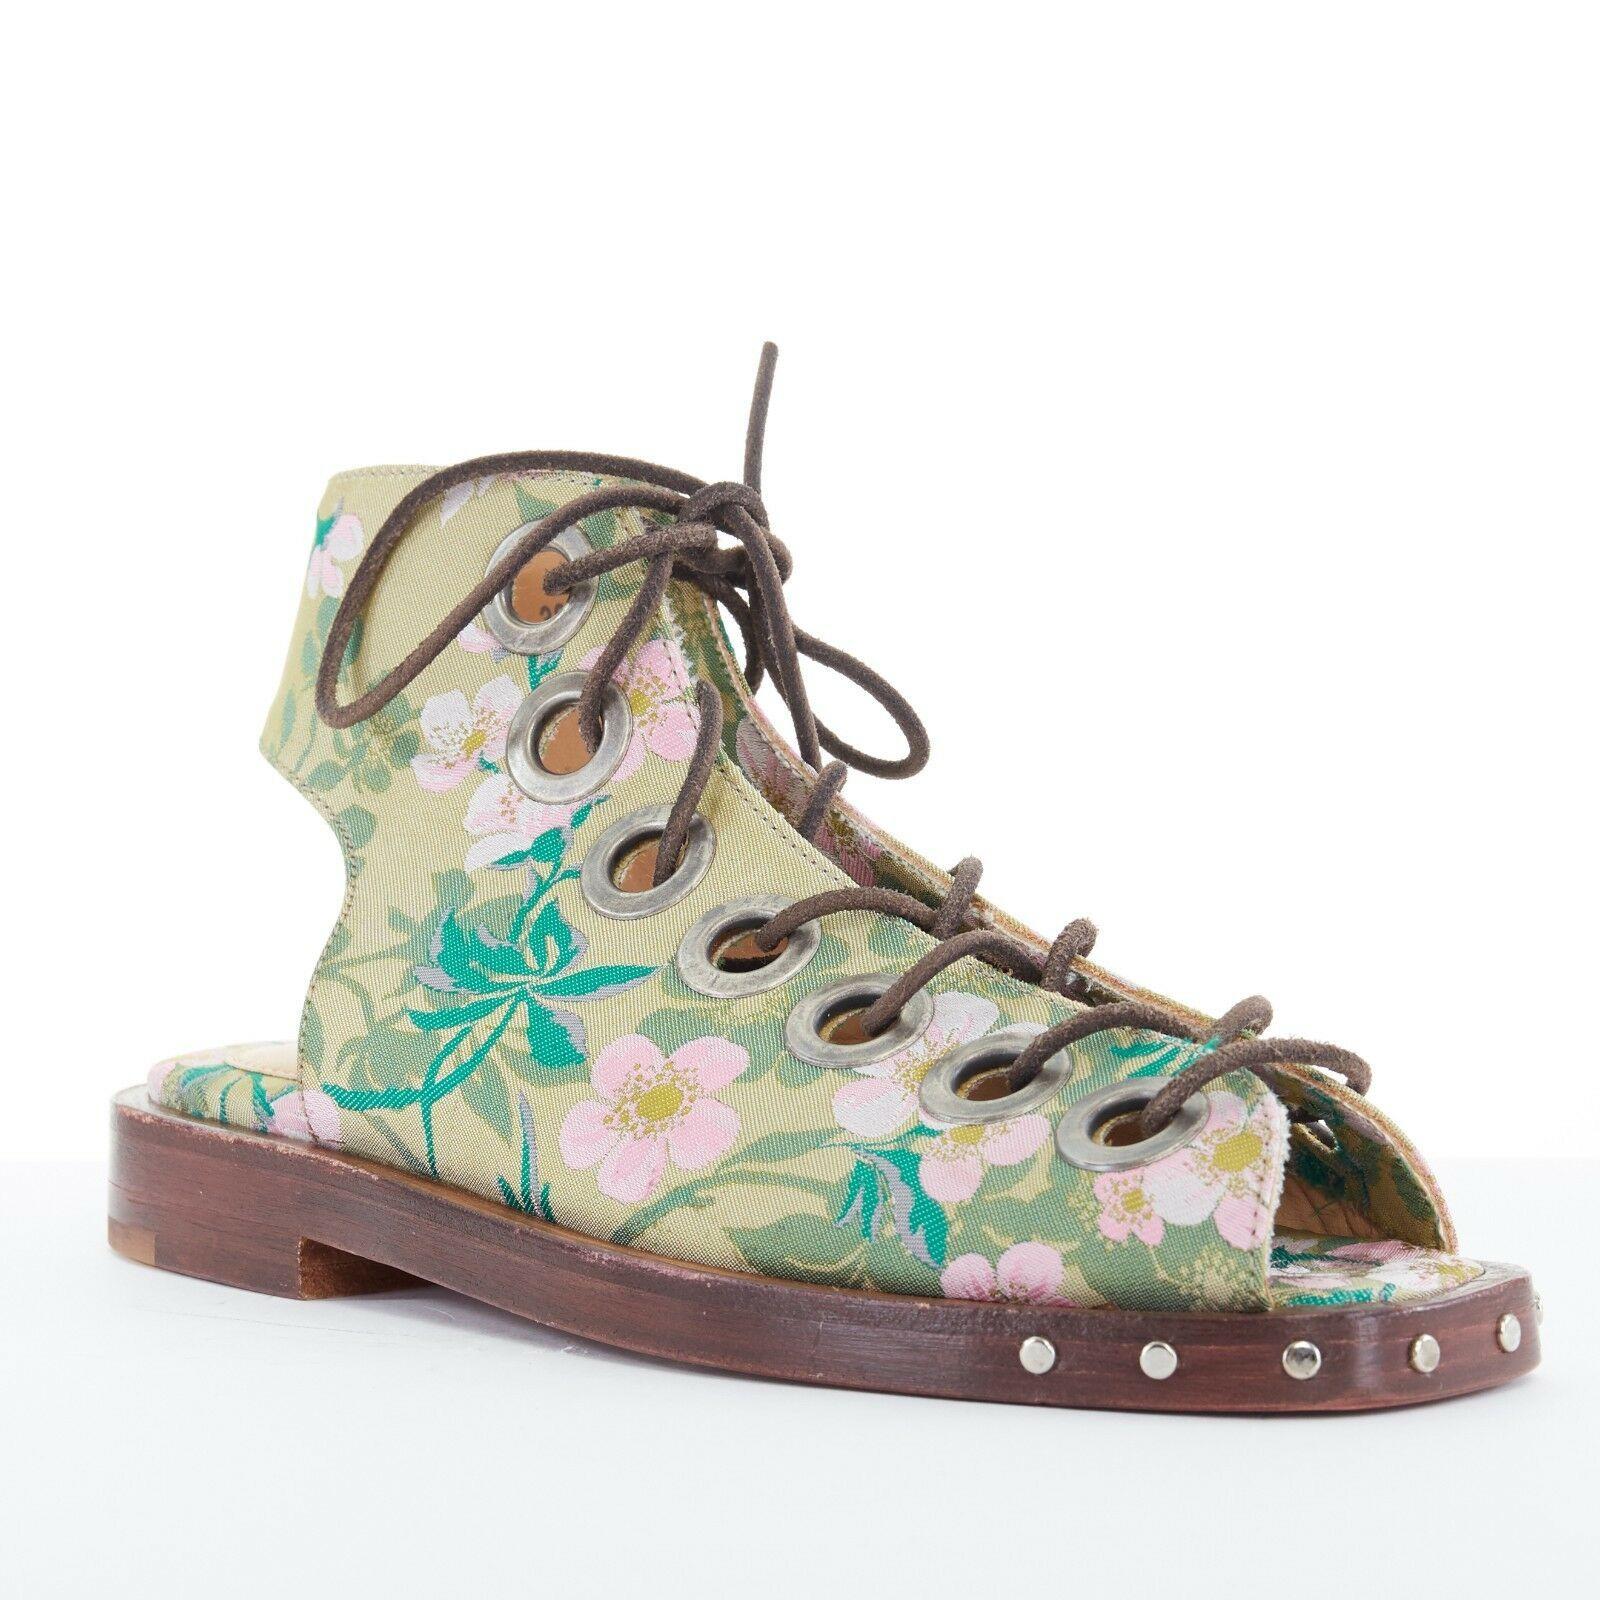 new MARQUES ALMEIDA green floral jaquard open toe eyelet lace flat sandal EU38

MARQUES ALMEIDA
Green and pink floral jacquard fabric upper. Open toe. Square toe. Black suede leather lace. Intentional aged copper-tone eyelet details. Cut out at